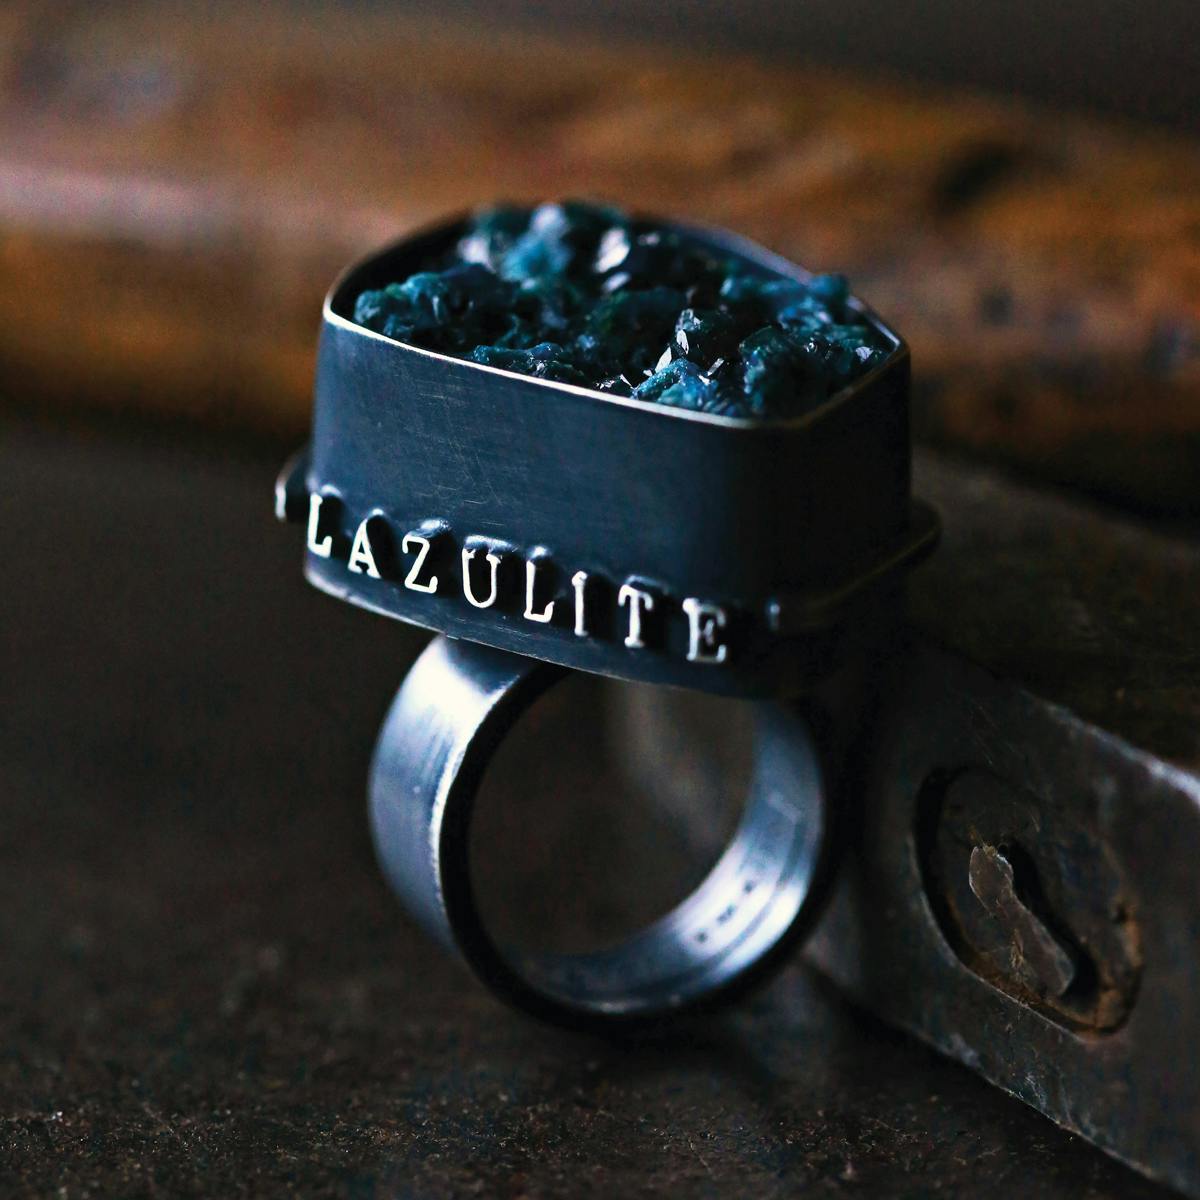 black metal ring with word lazulite and dark blue minerals